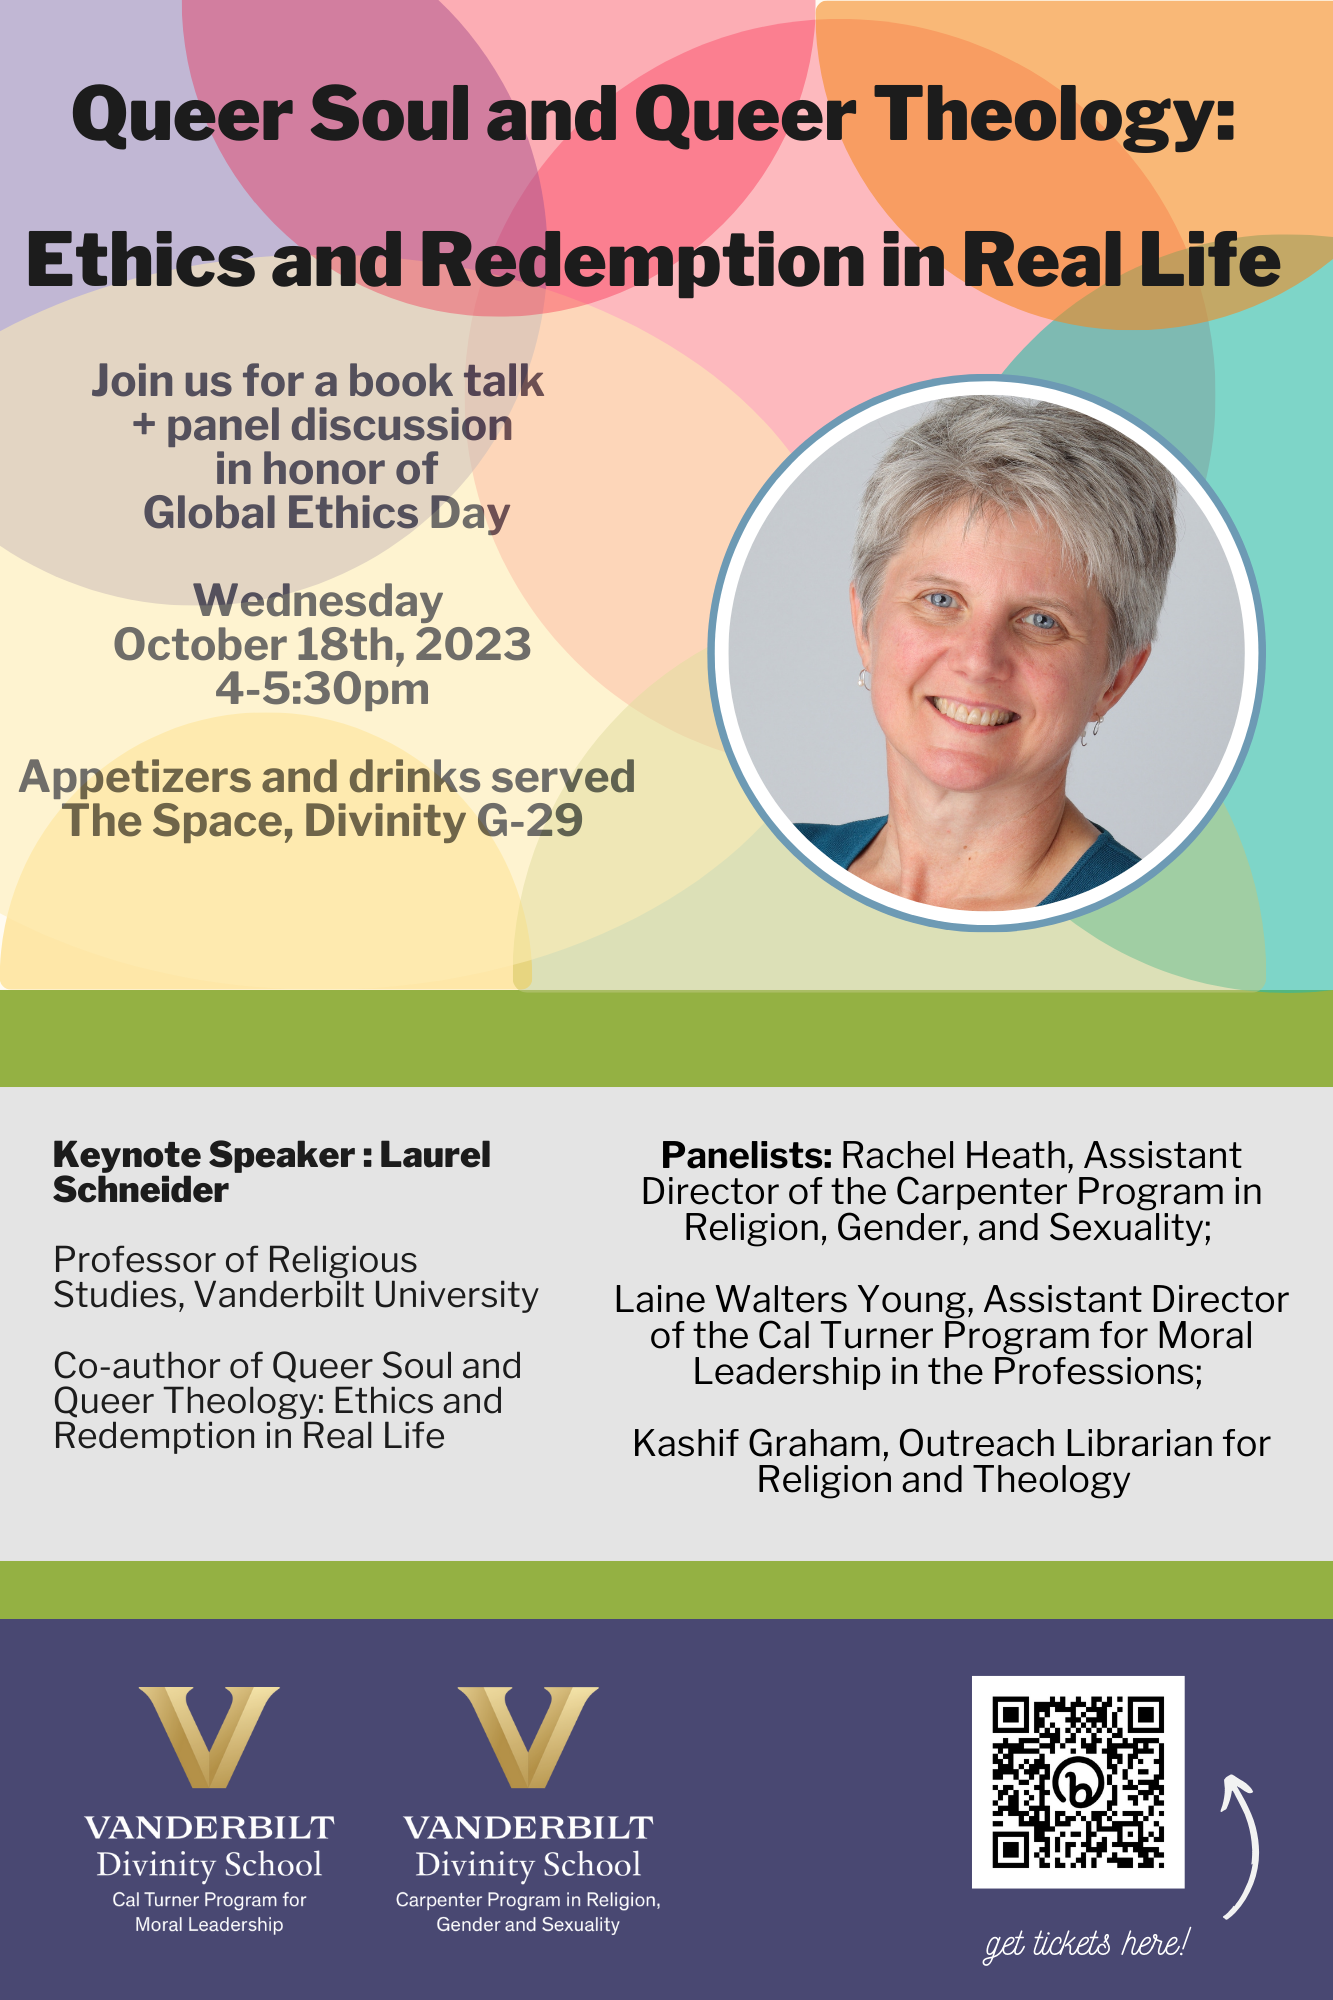 this is a poster for global ethics day on October 18th 2023. There is a picture of the keynote speaker: Laurel Schneider 